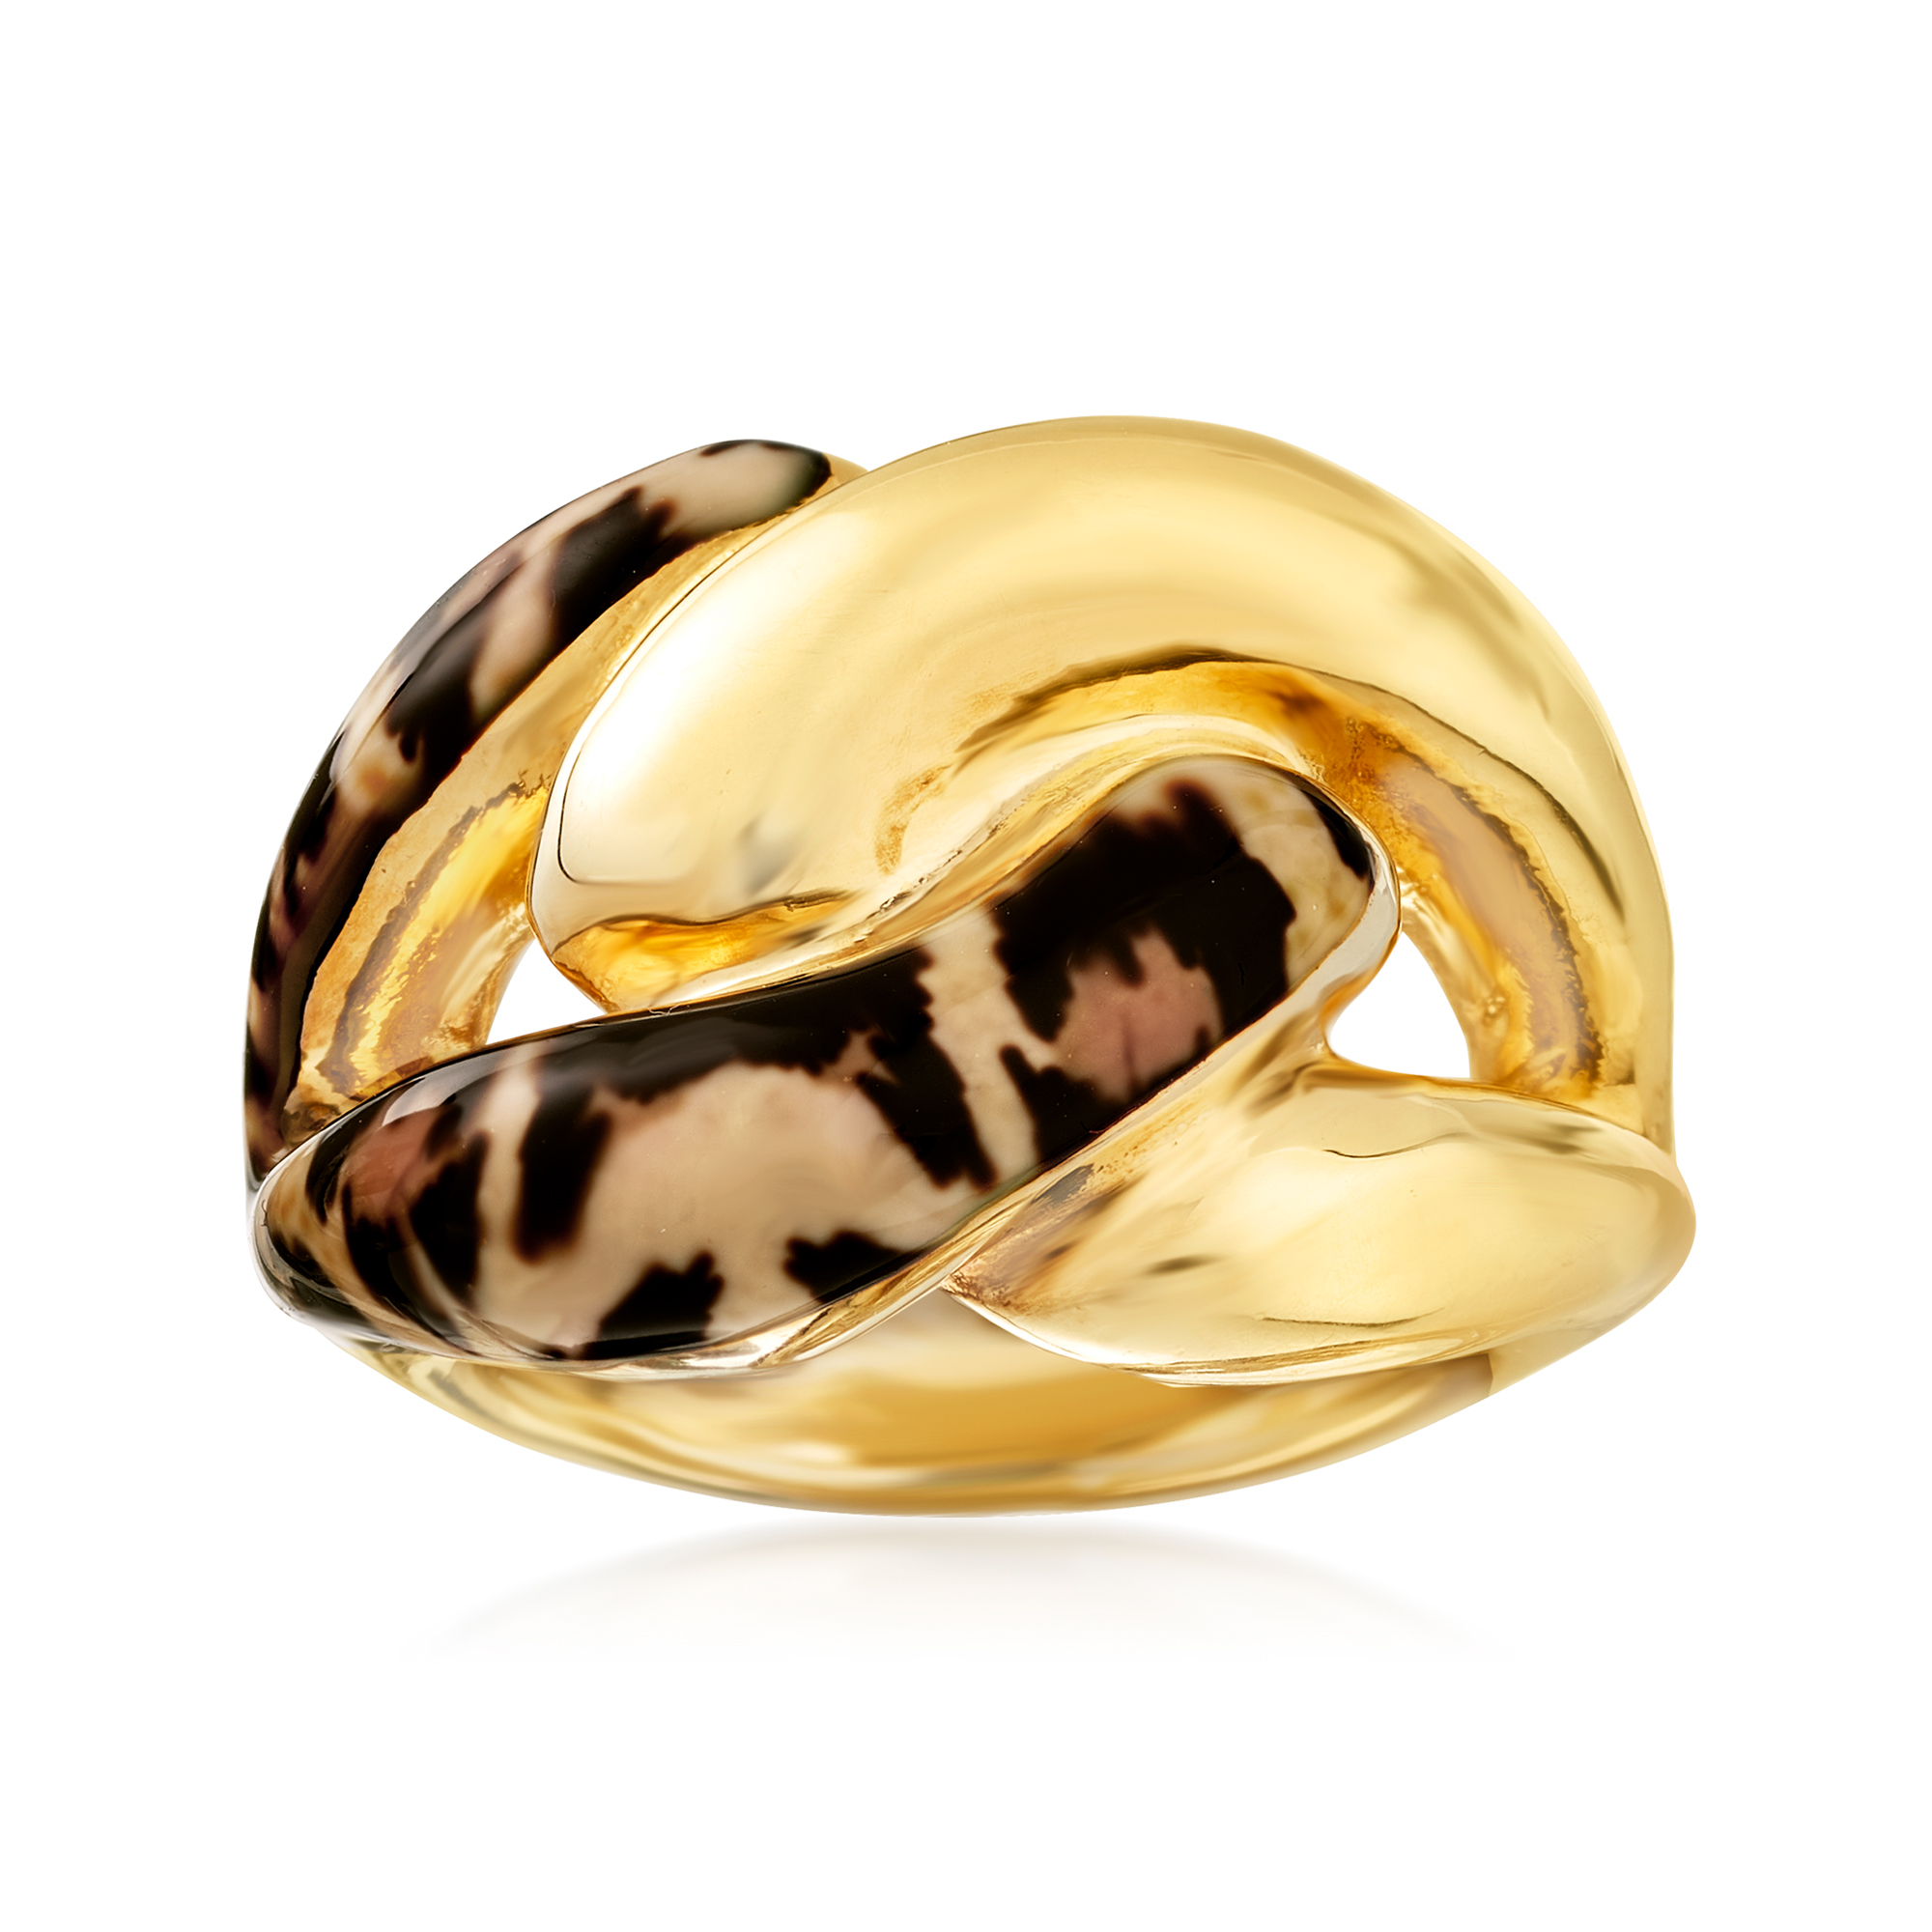 Sterling Silver Polished Enameled Animal Print Ring by Stackable Expressions Best Quality Free Gift Box